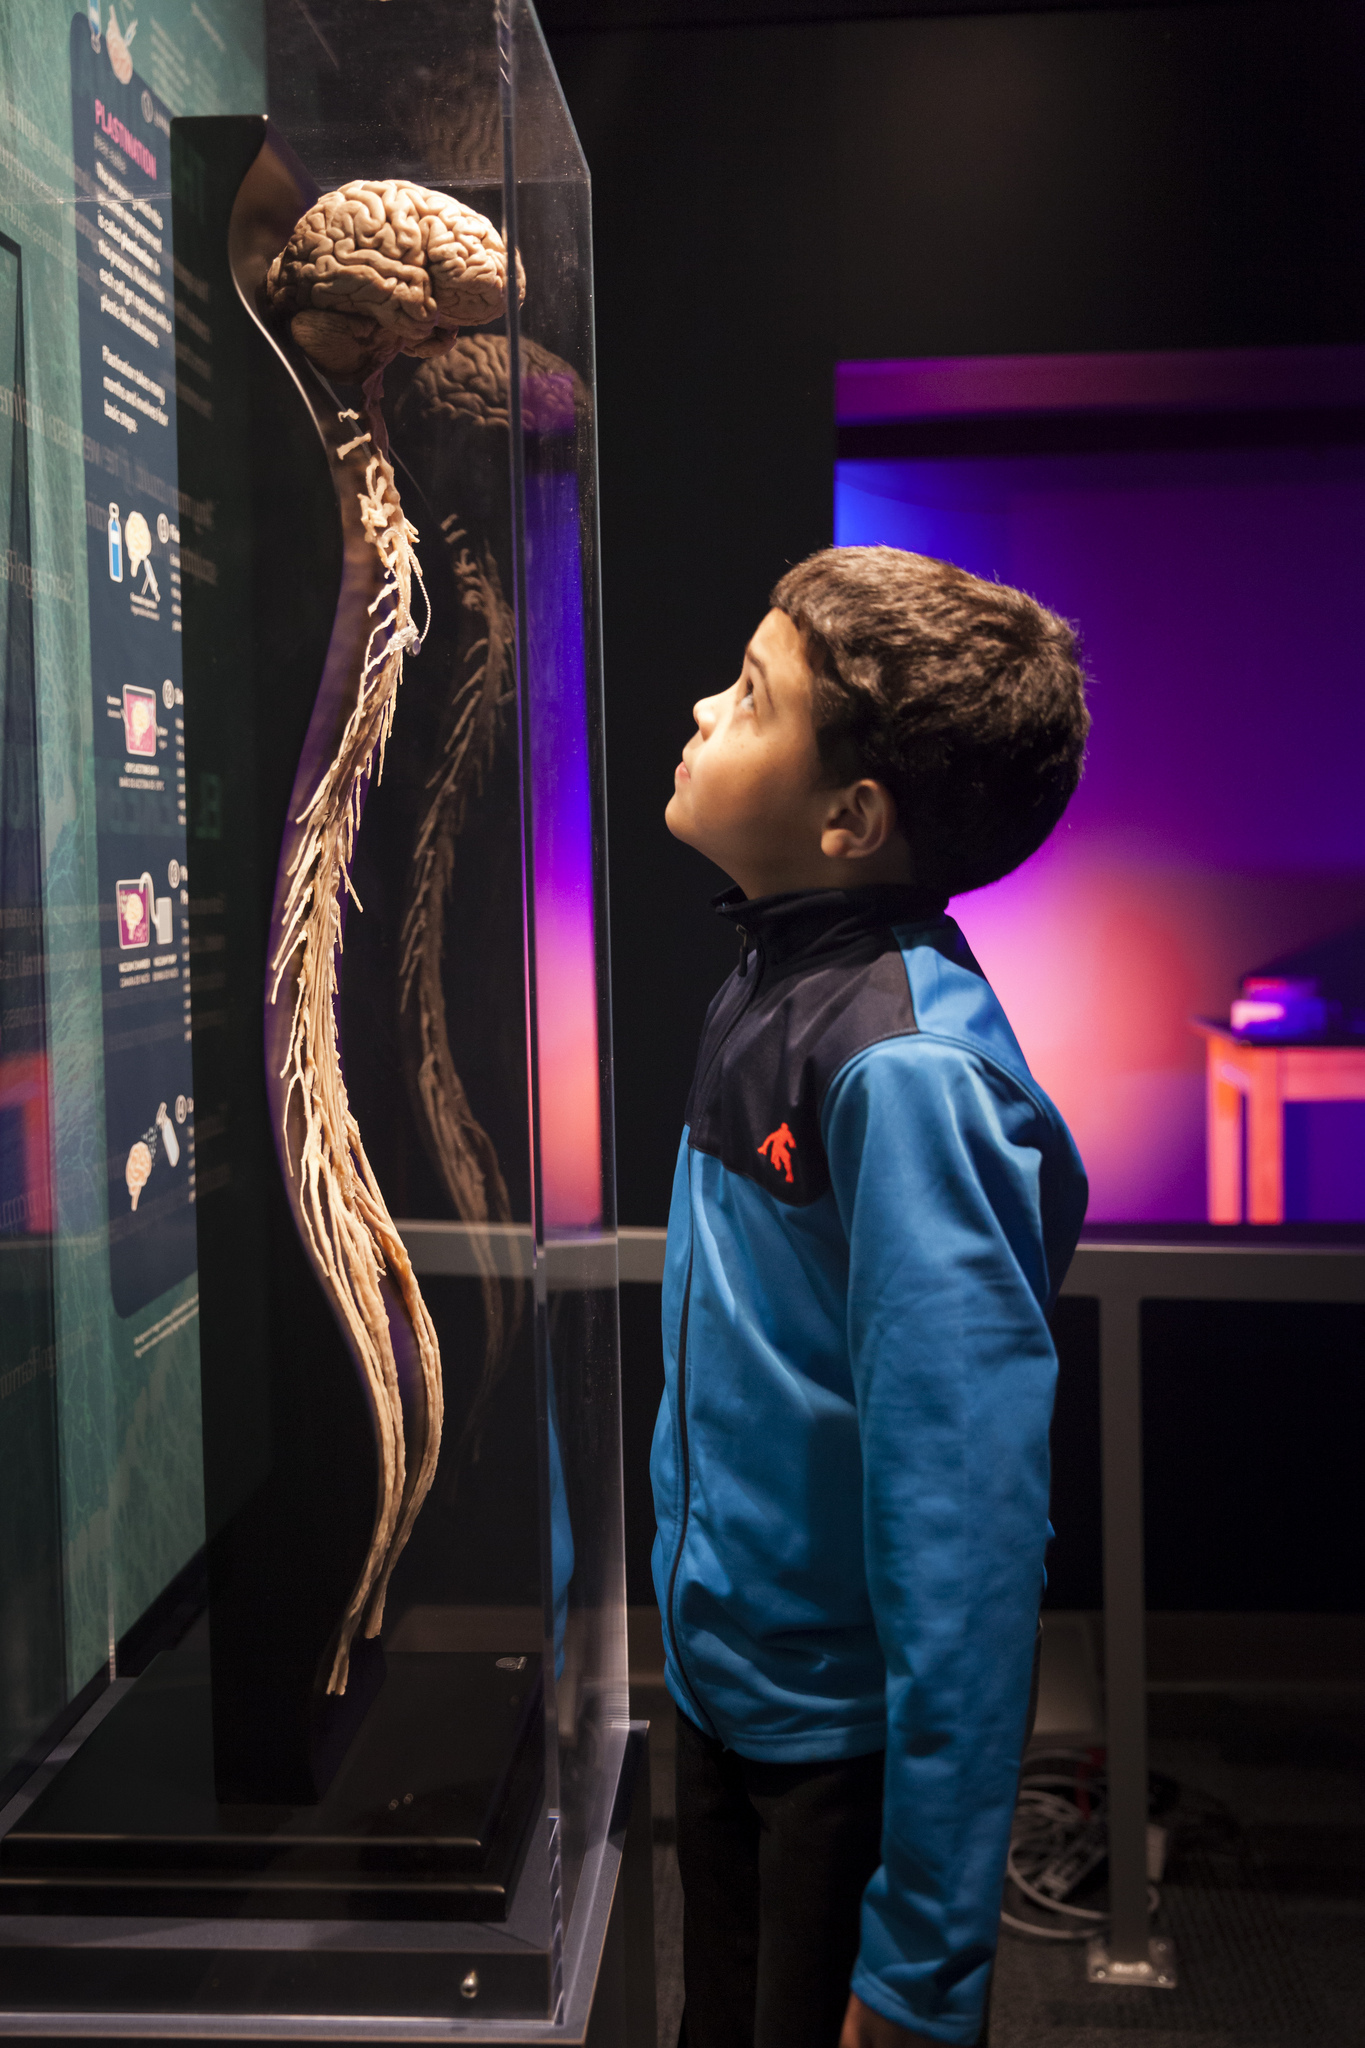 A kid looking at a brain